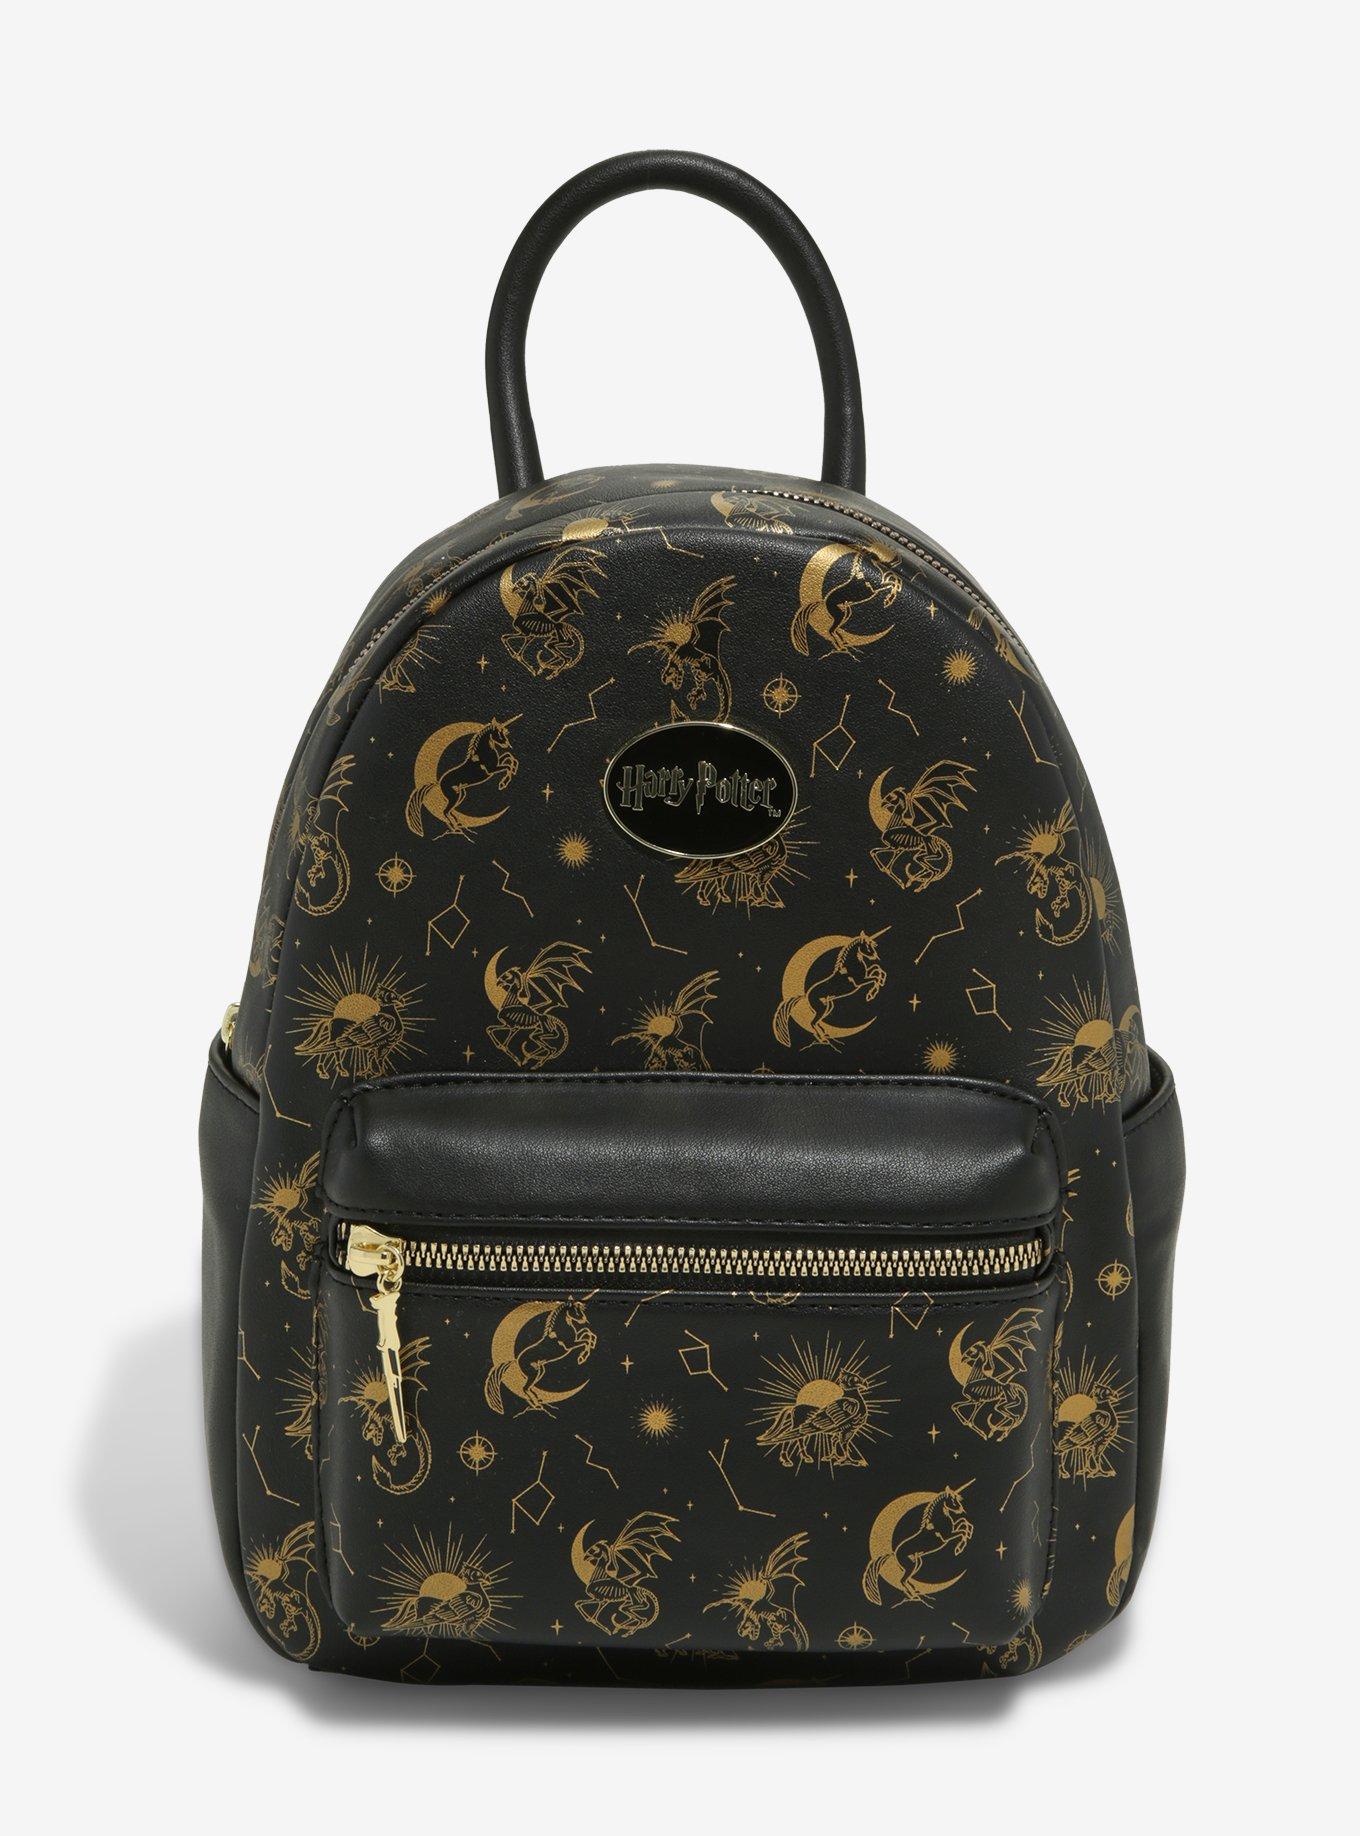 Harry Potter Celestial Magical Creatures Mini Backpack | Hot Topic